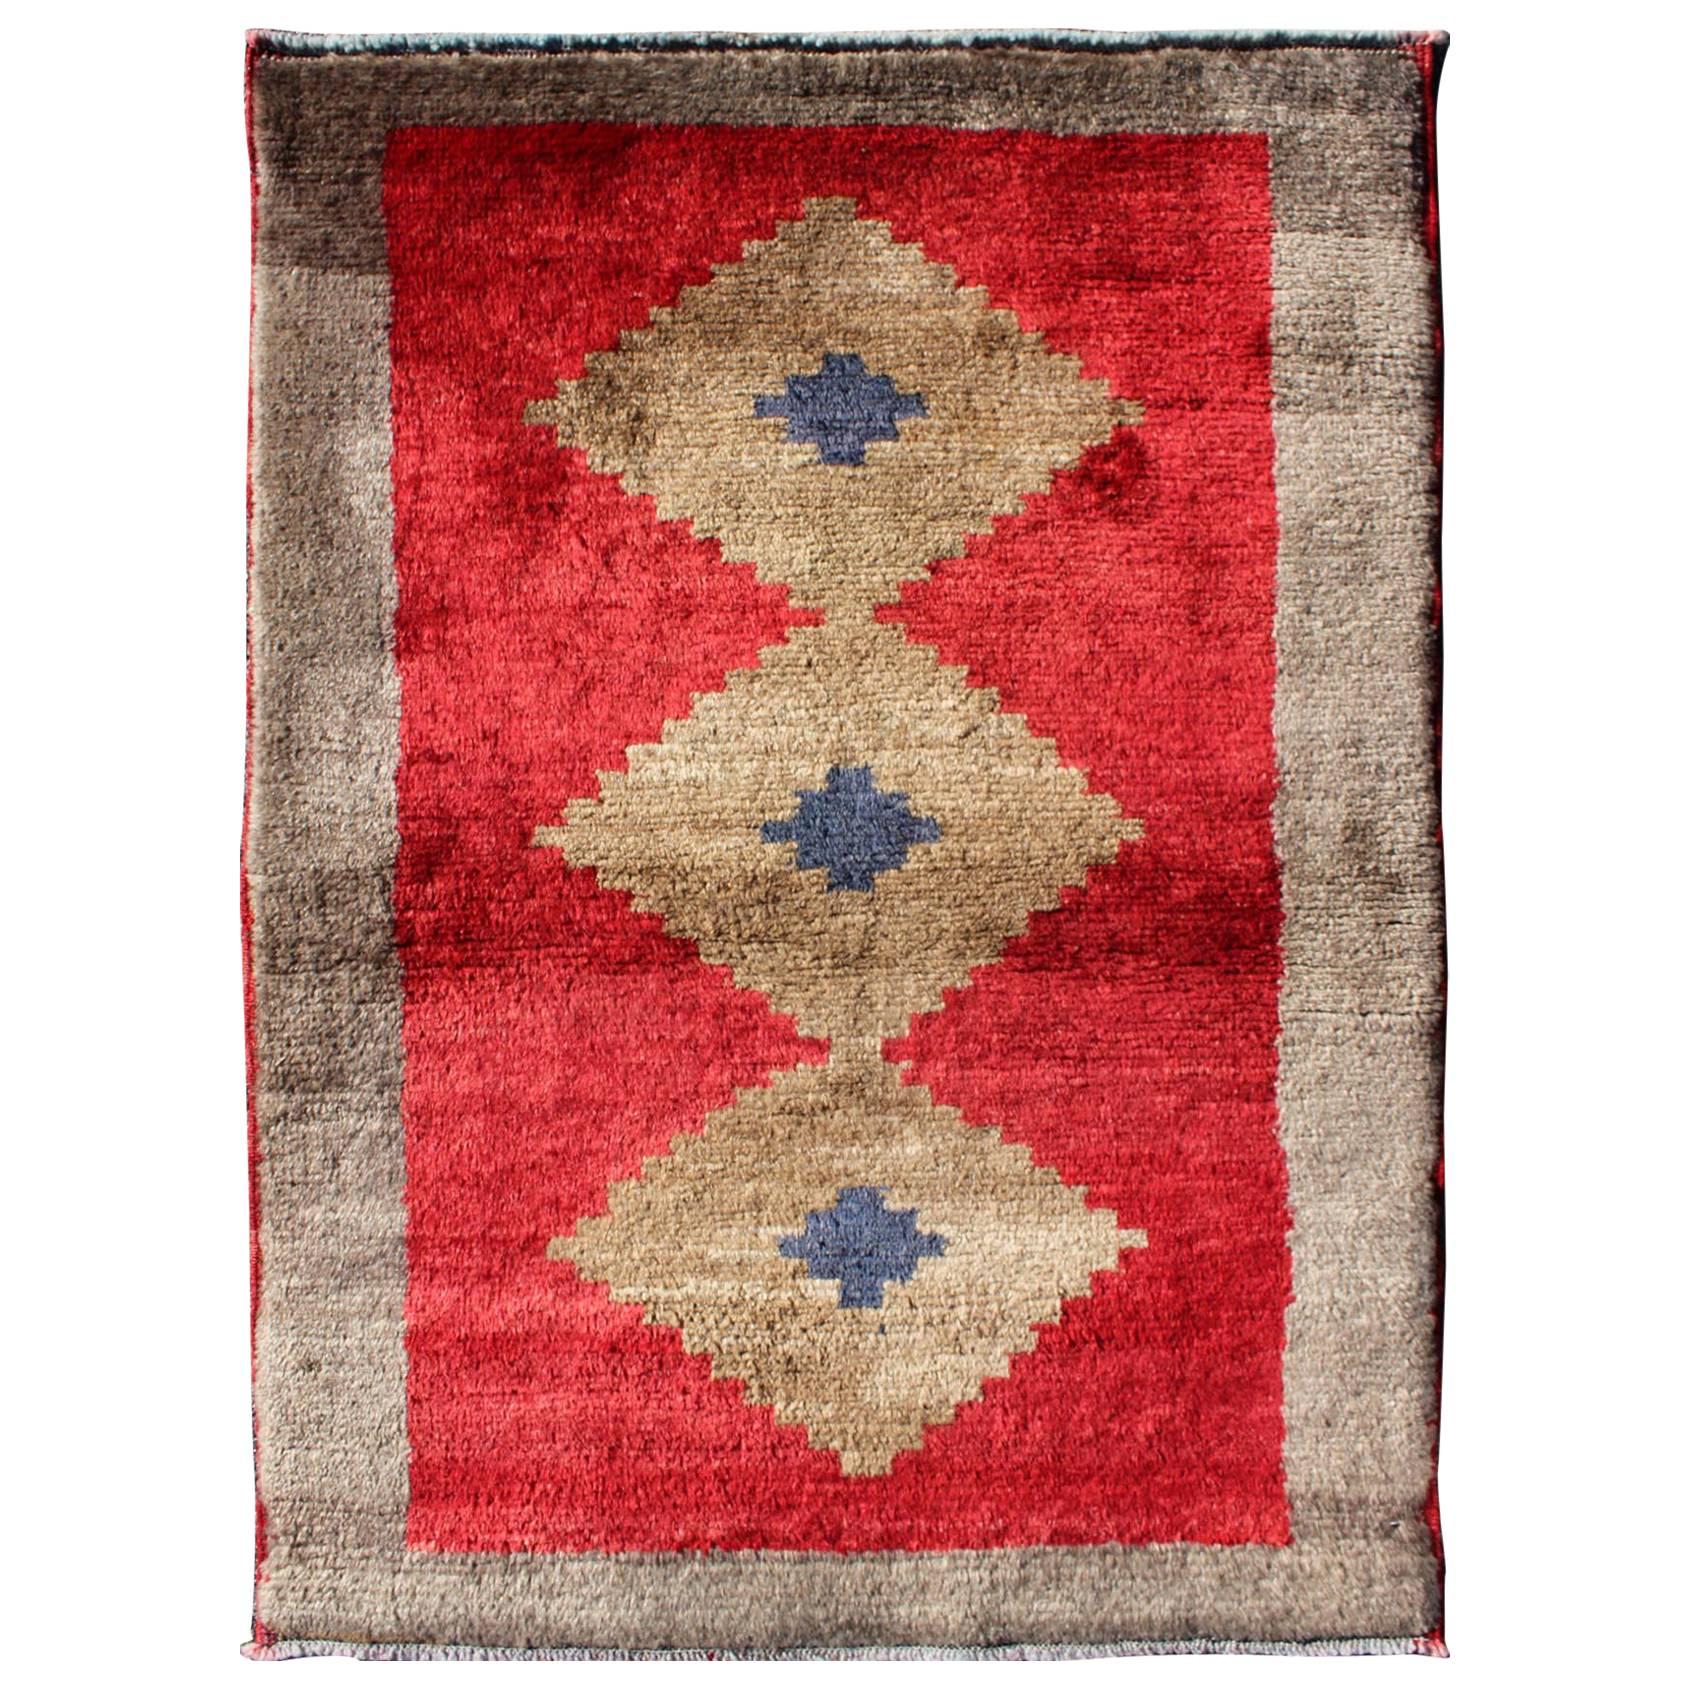 Midcentury Turkish Tulu Rug with Diamond Design in Bright Red and Tan Colors